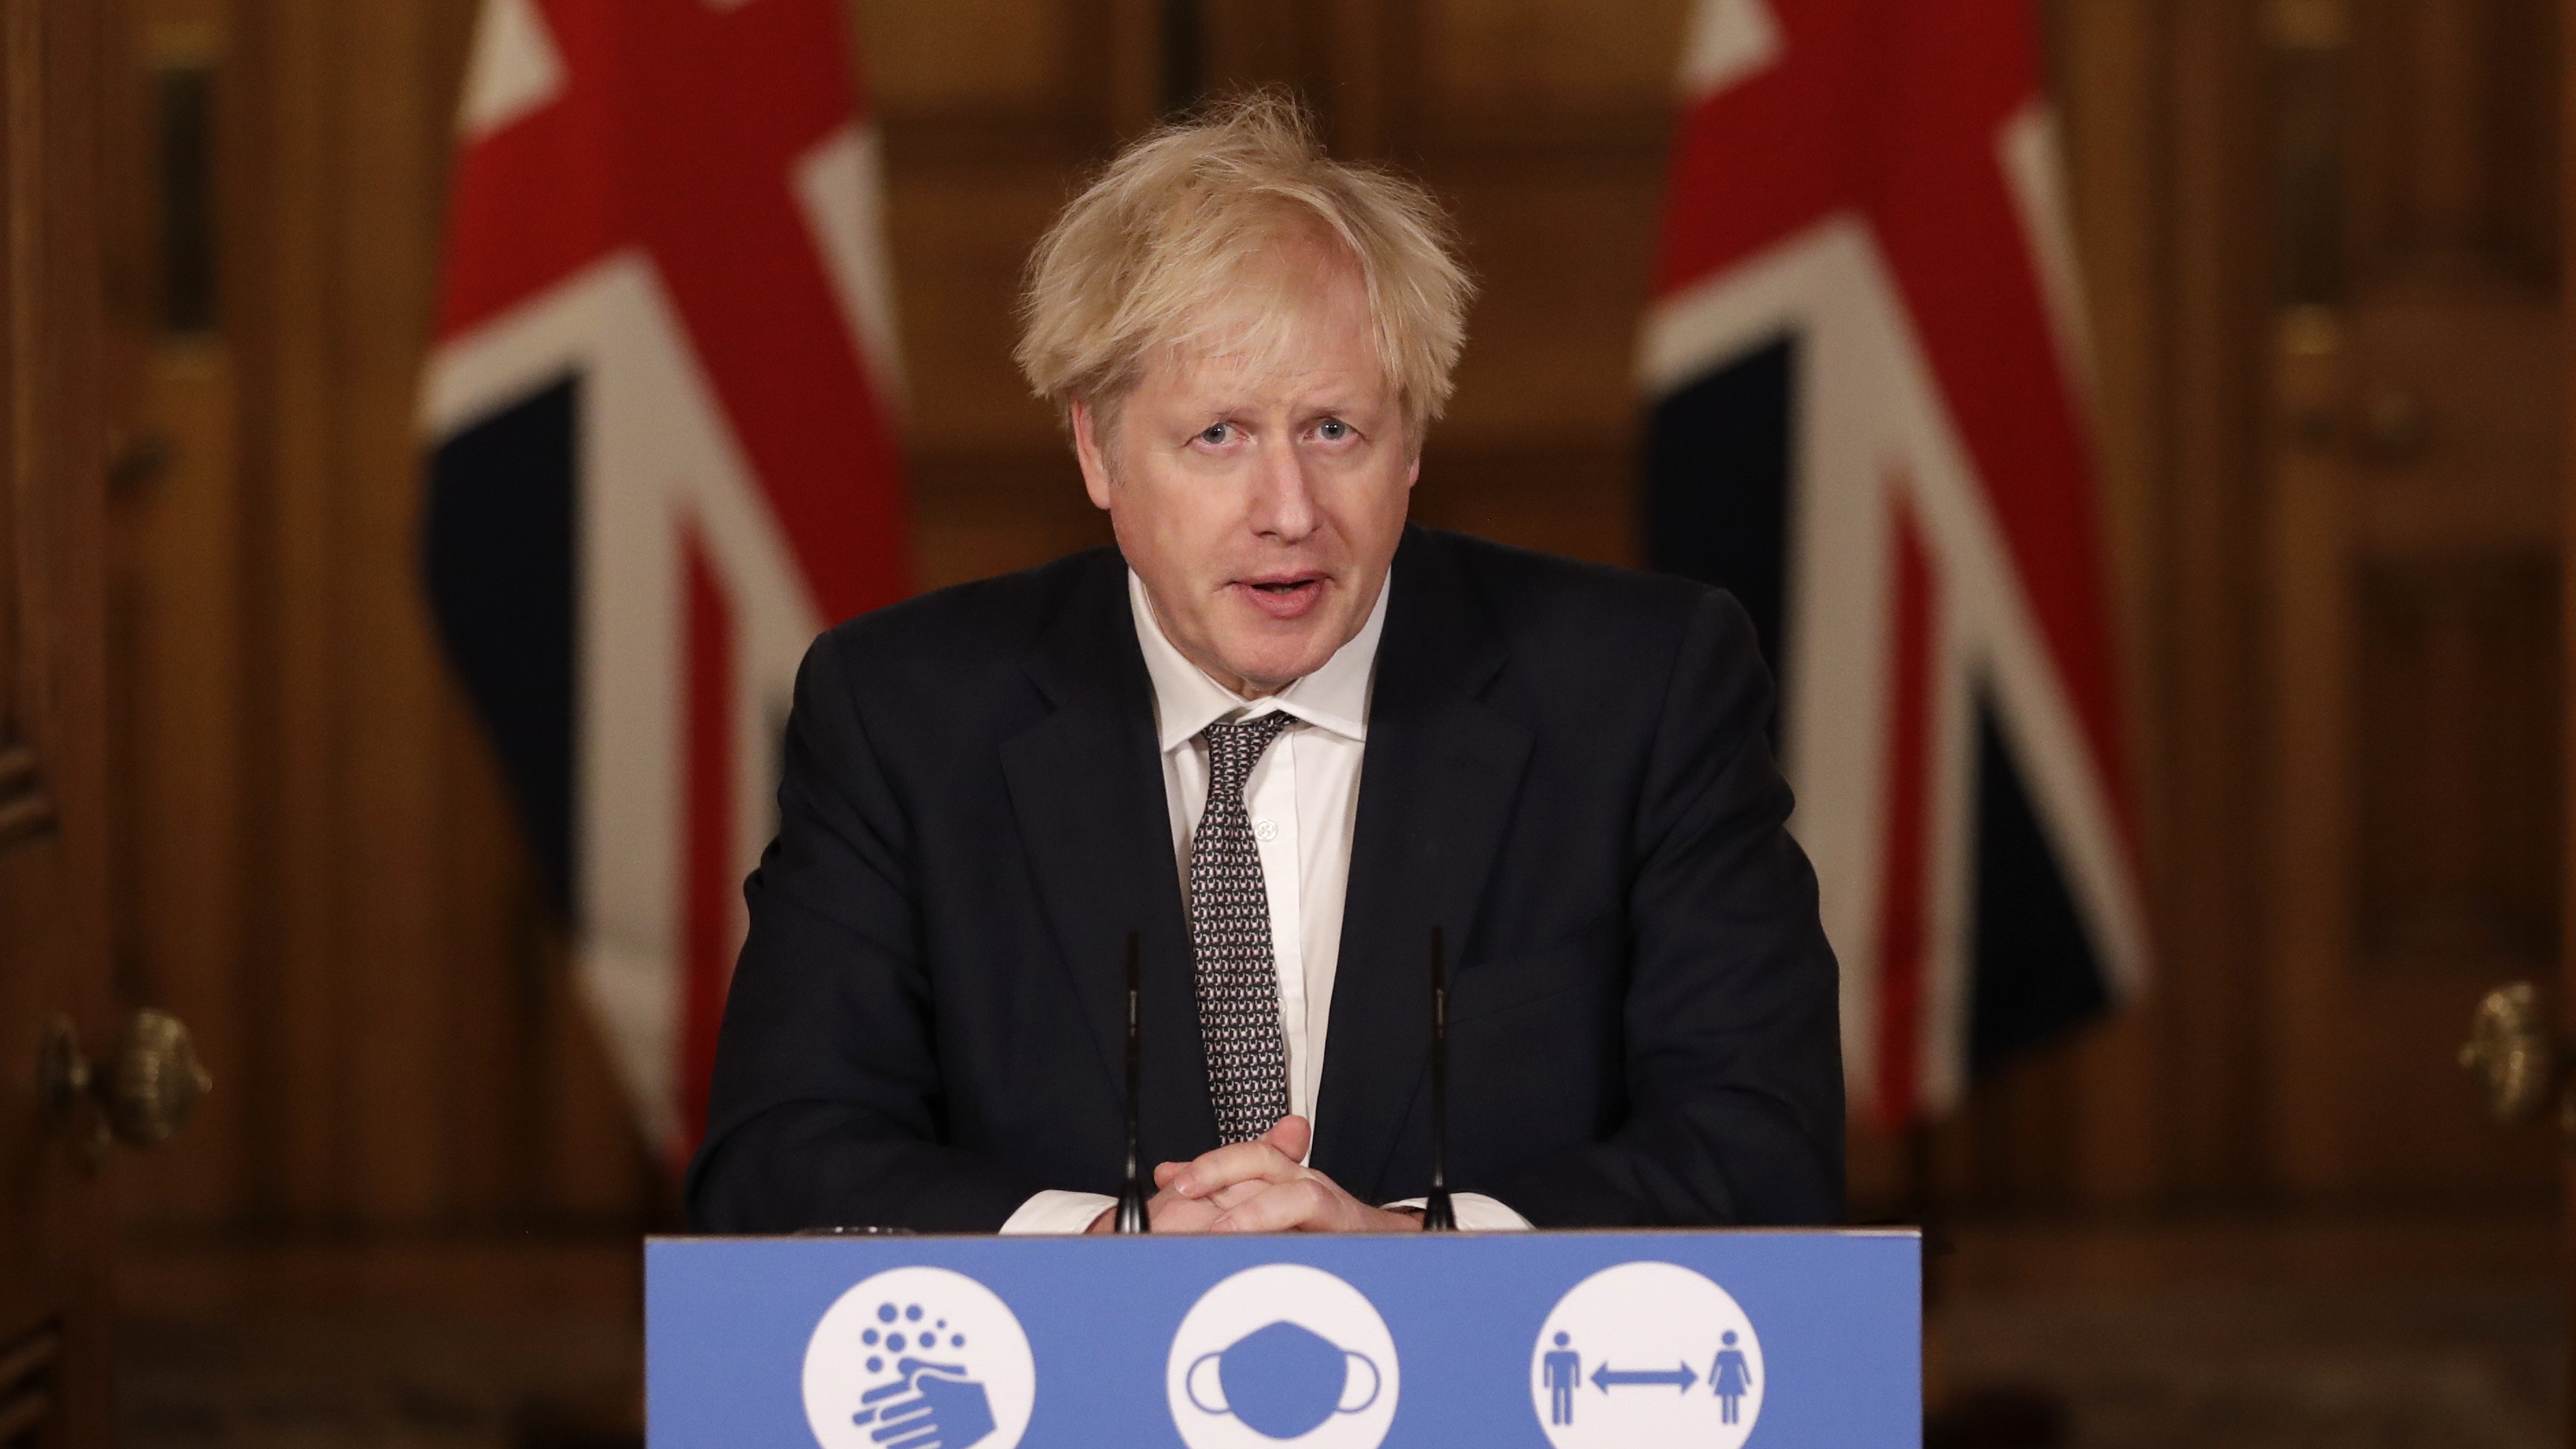 Boris Johnson speaks during a news conference at Downing Street.